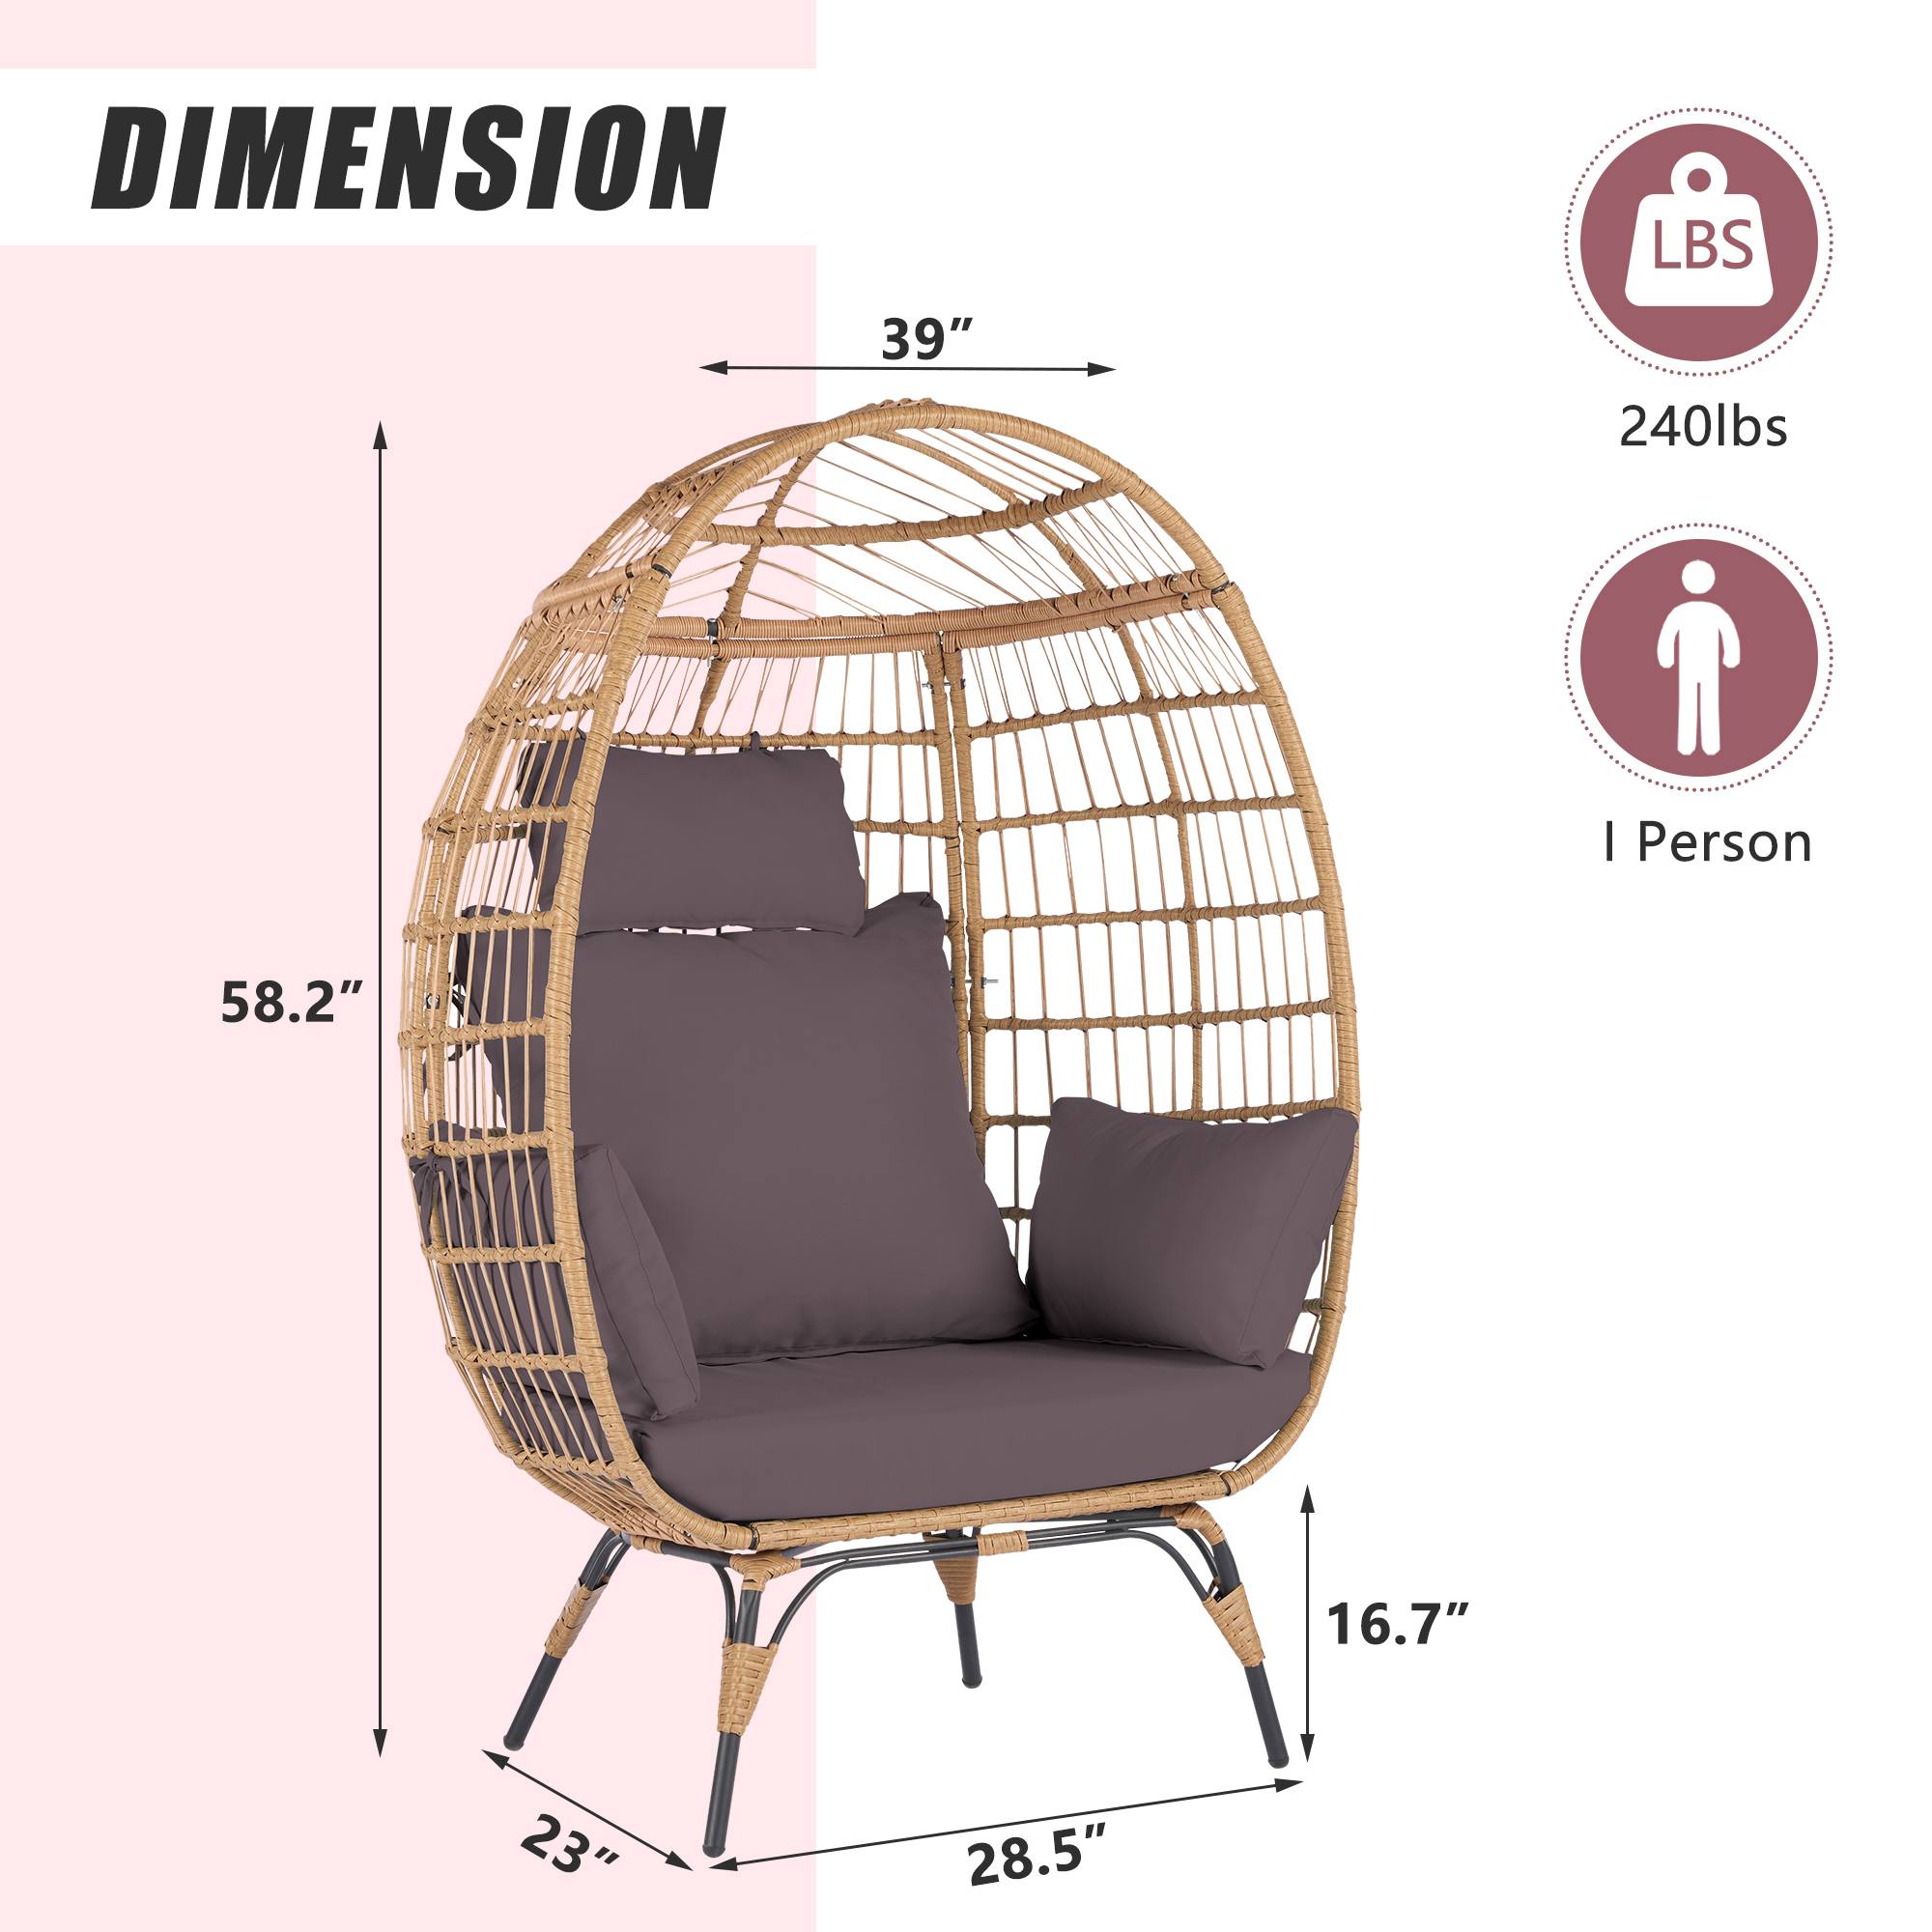 Wicker Egg Chair, Oversized Indoor Outdoor Boho Lounger Chair Stationary Egg Basket Chair, All-Weather 440lb Capacity Patio Chair, Dark Gray - image 3 of 9